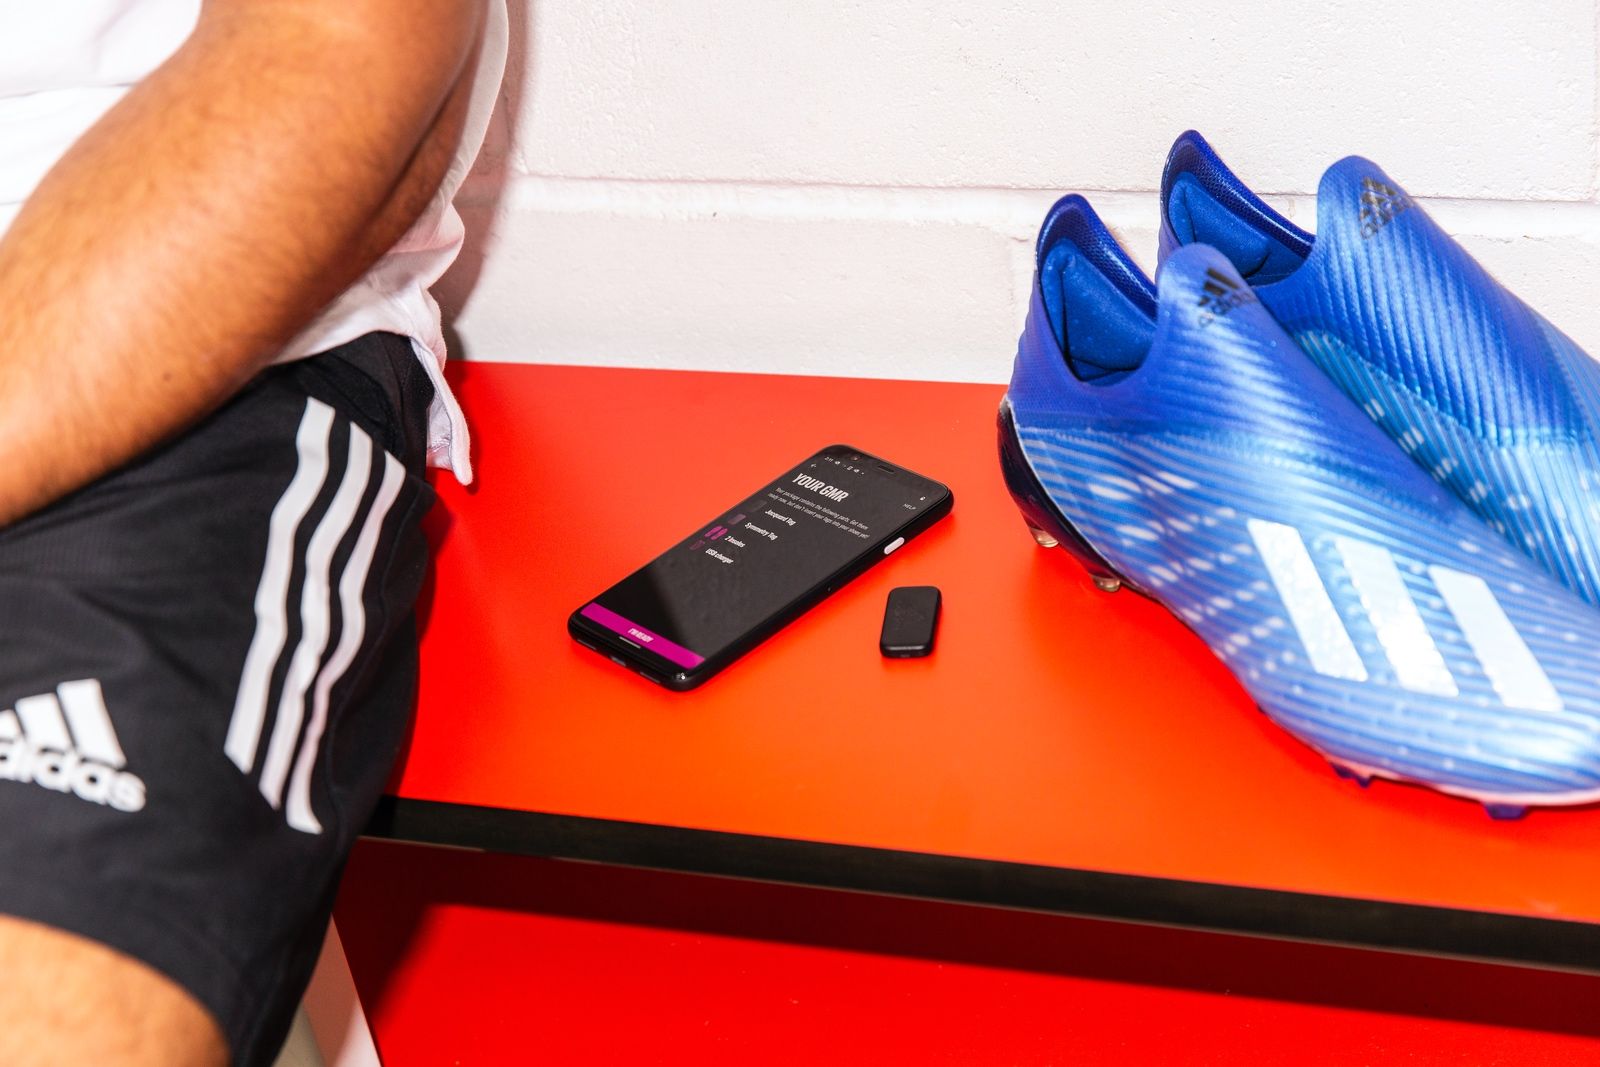 Adidas GMR is a Google Jacquard smart tag insole to track your football progress image 1